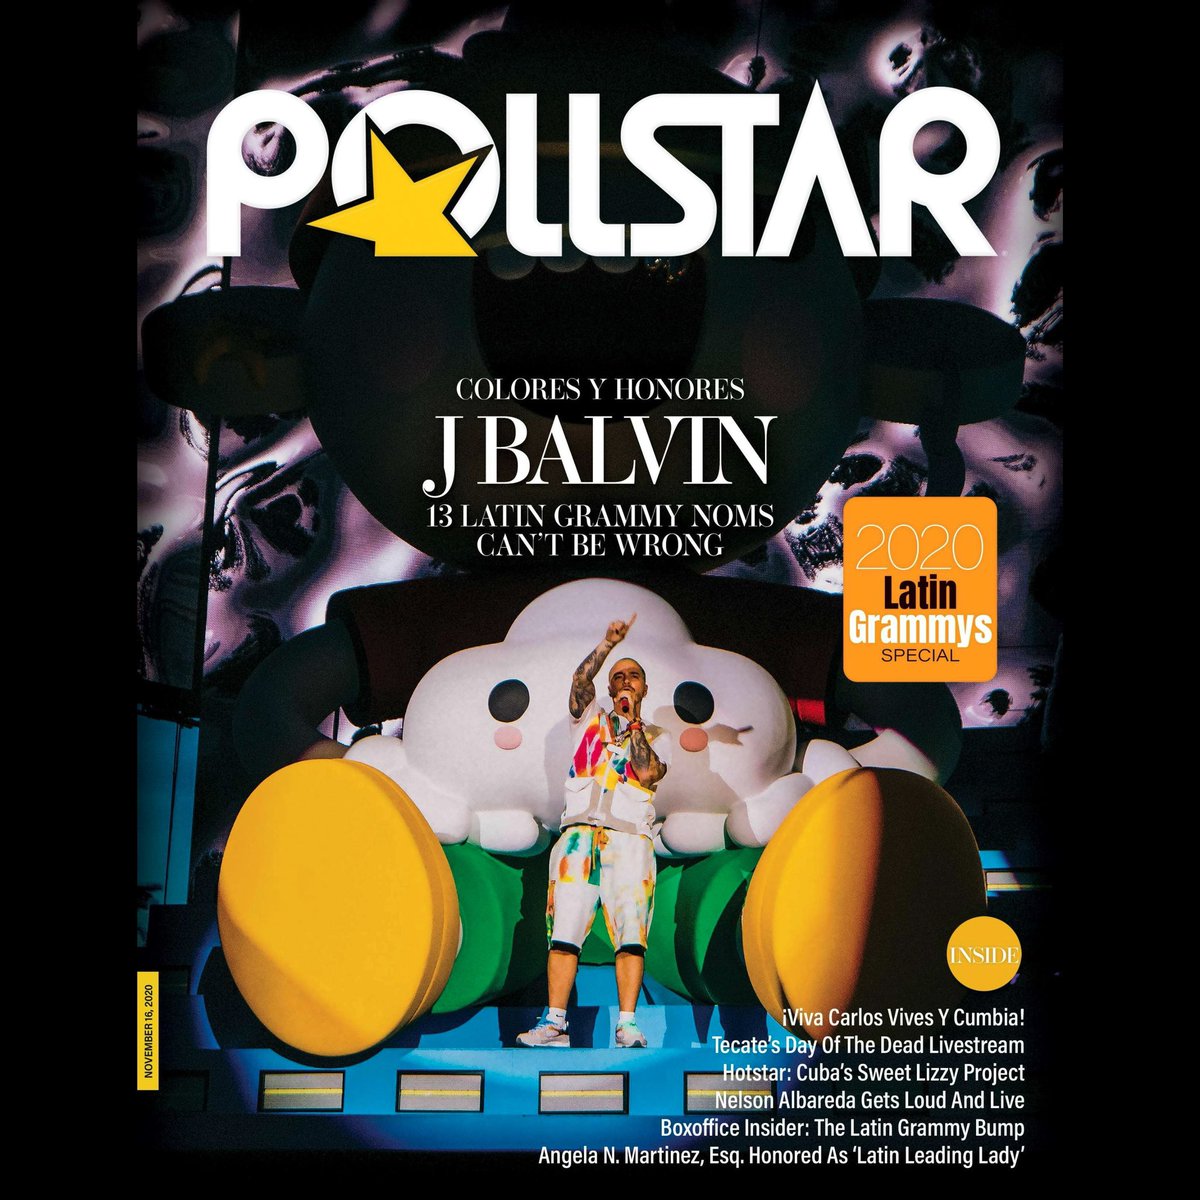 Don’t miss the latest from @Pollstar featuring @JBALVIN on the cover and an in-depth interview with our CEO #NelsonAlbareda on our role in bringing to life his iconic partnership with @McDonalds, pivoting in the times of #COVID and the bright future ahead. bit.ly/2Hf0lyr